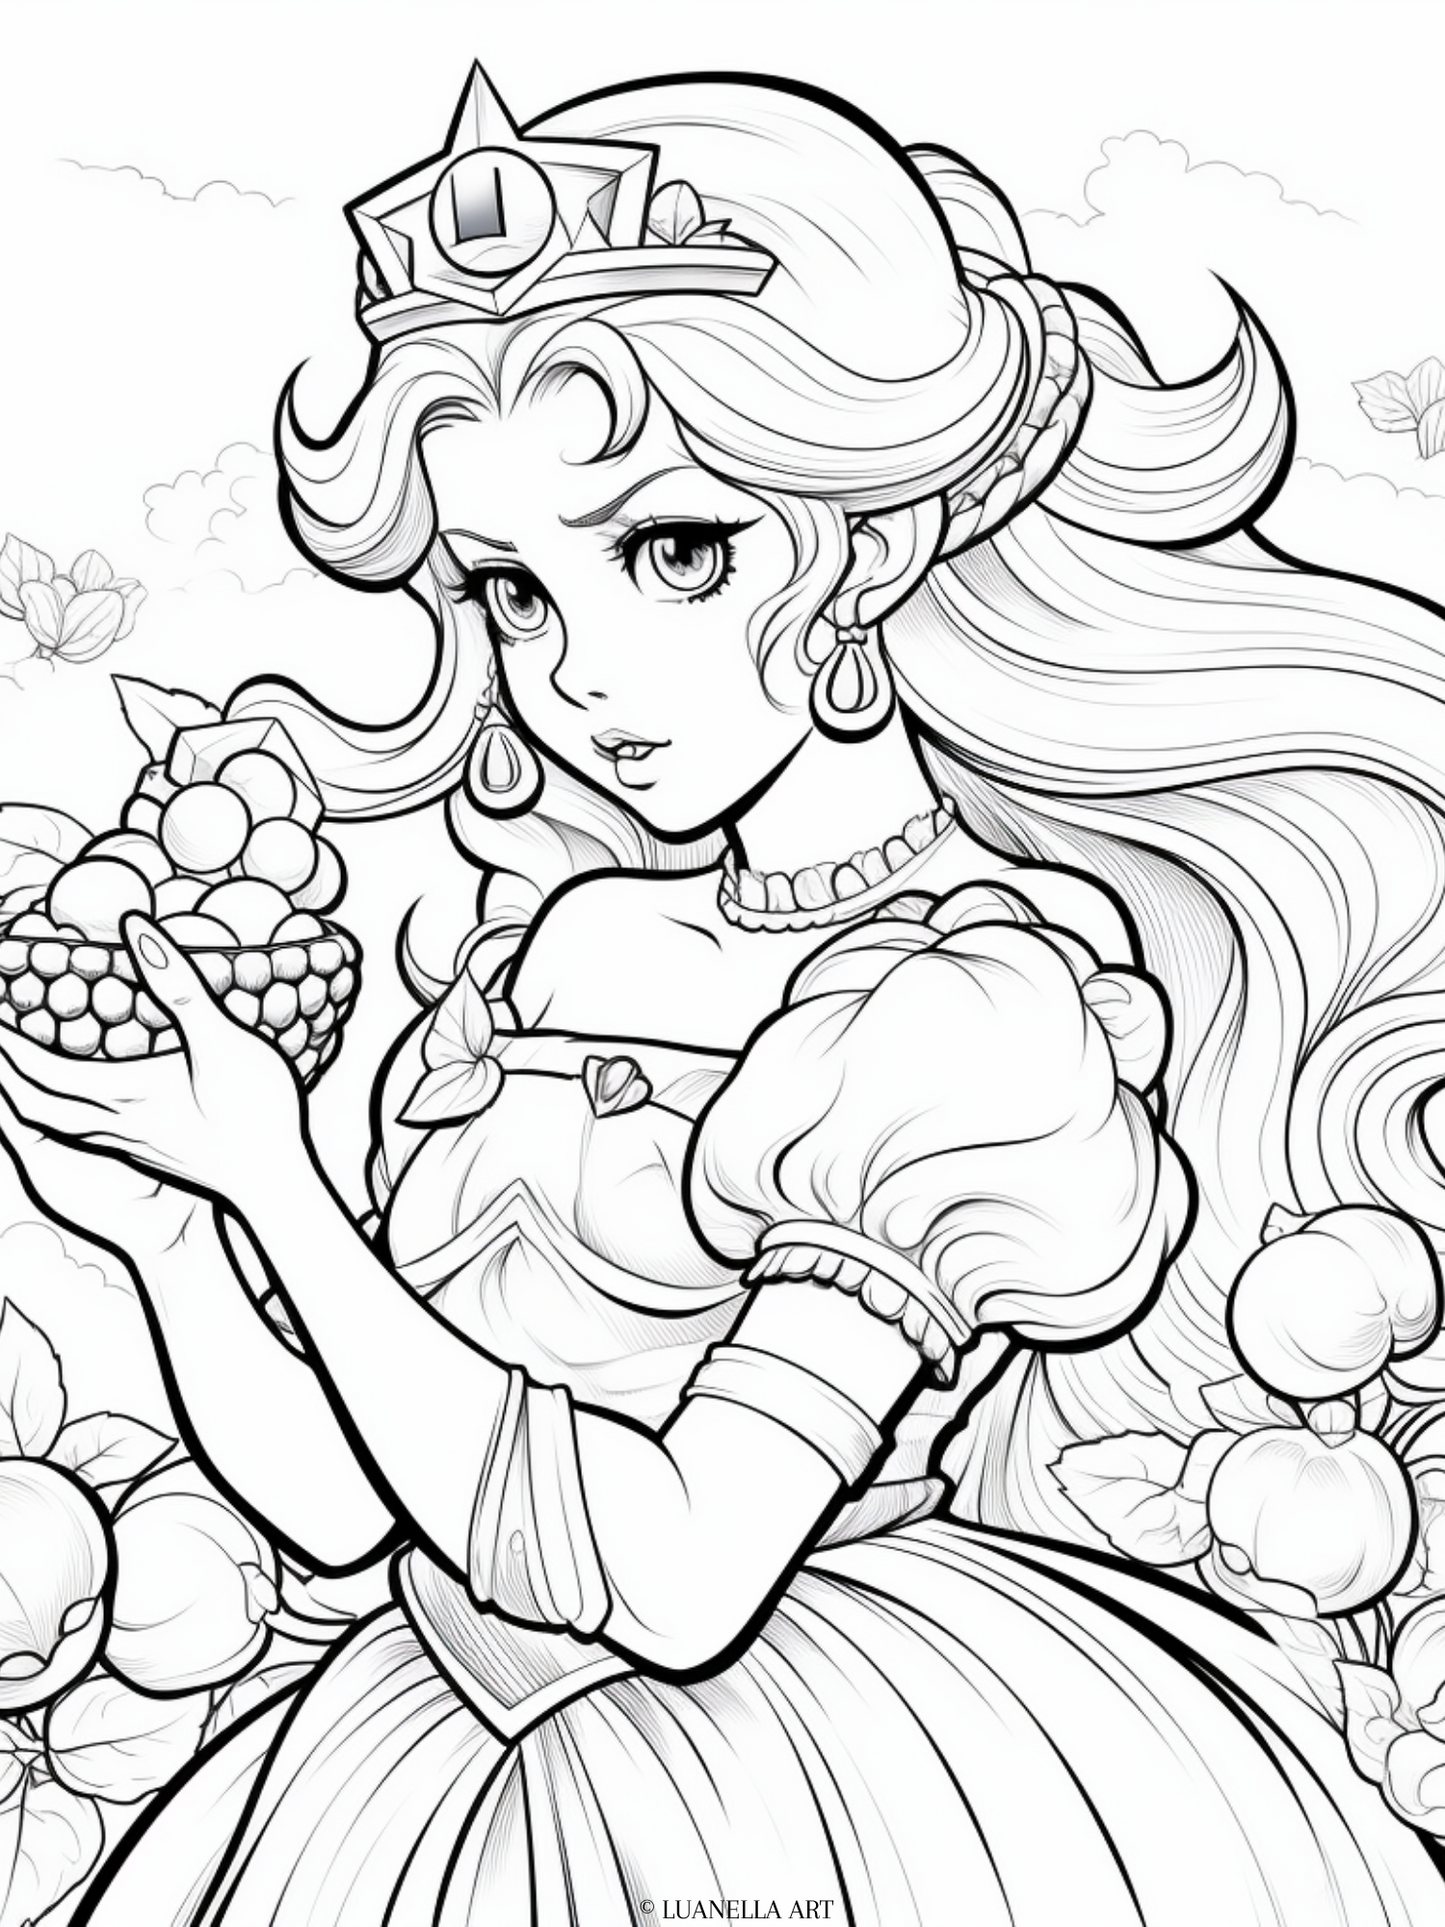 Princess Peach carrying bowl of fruit | Coloring Page | Instant Digital Download